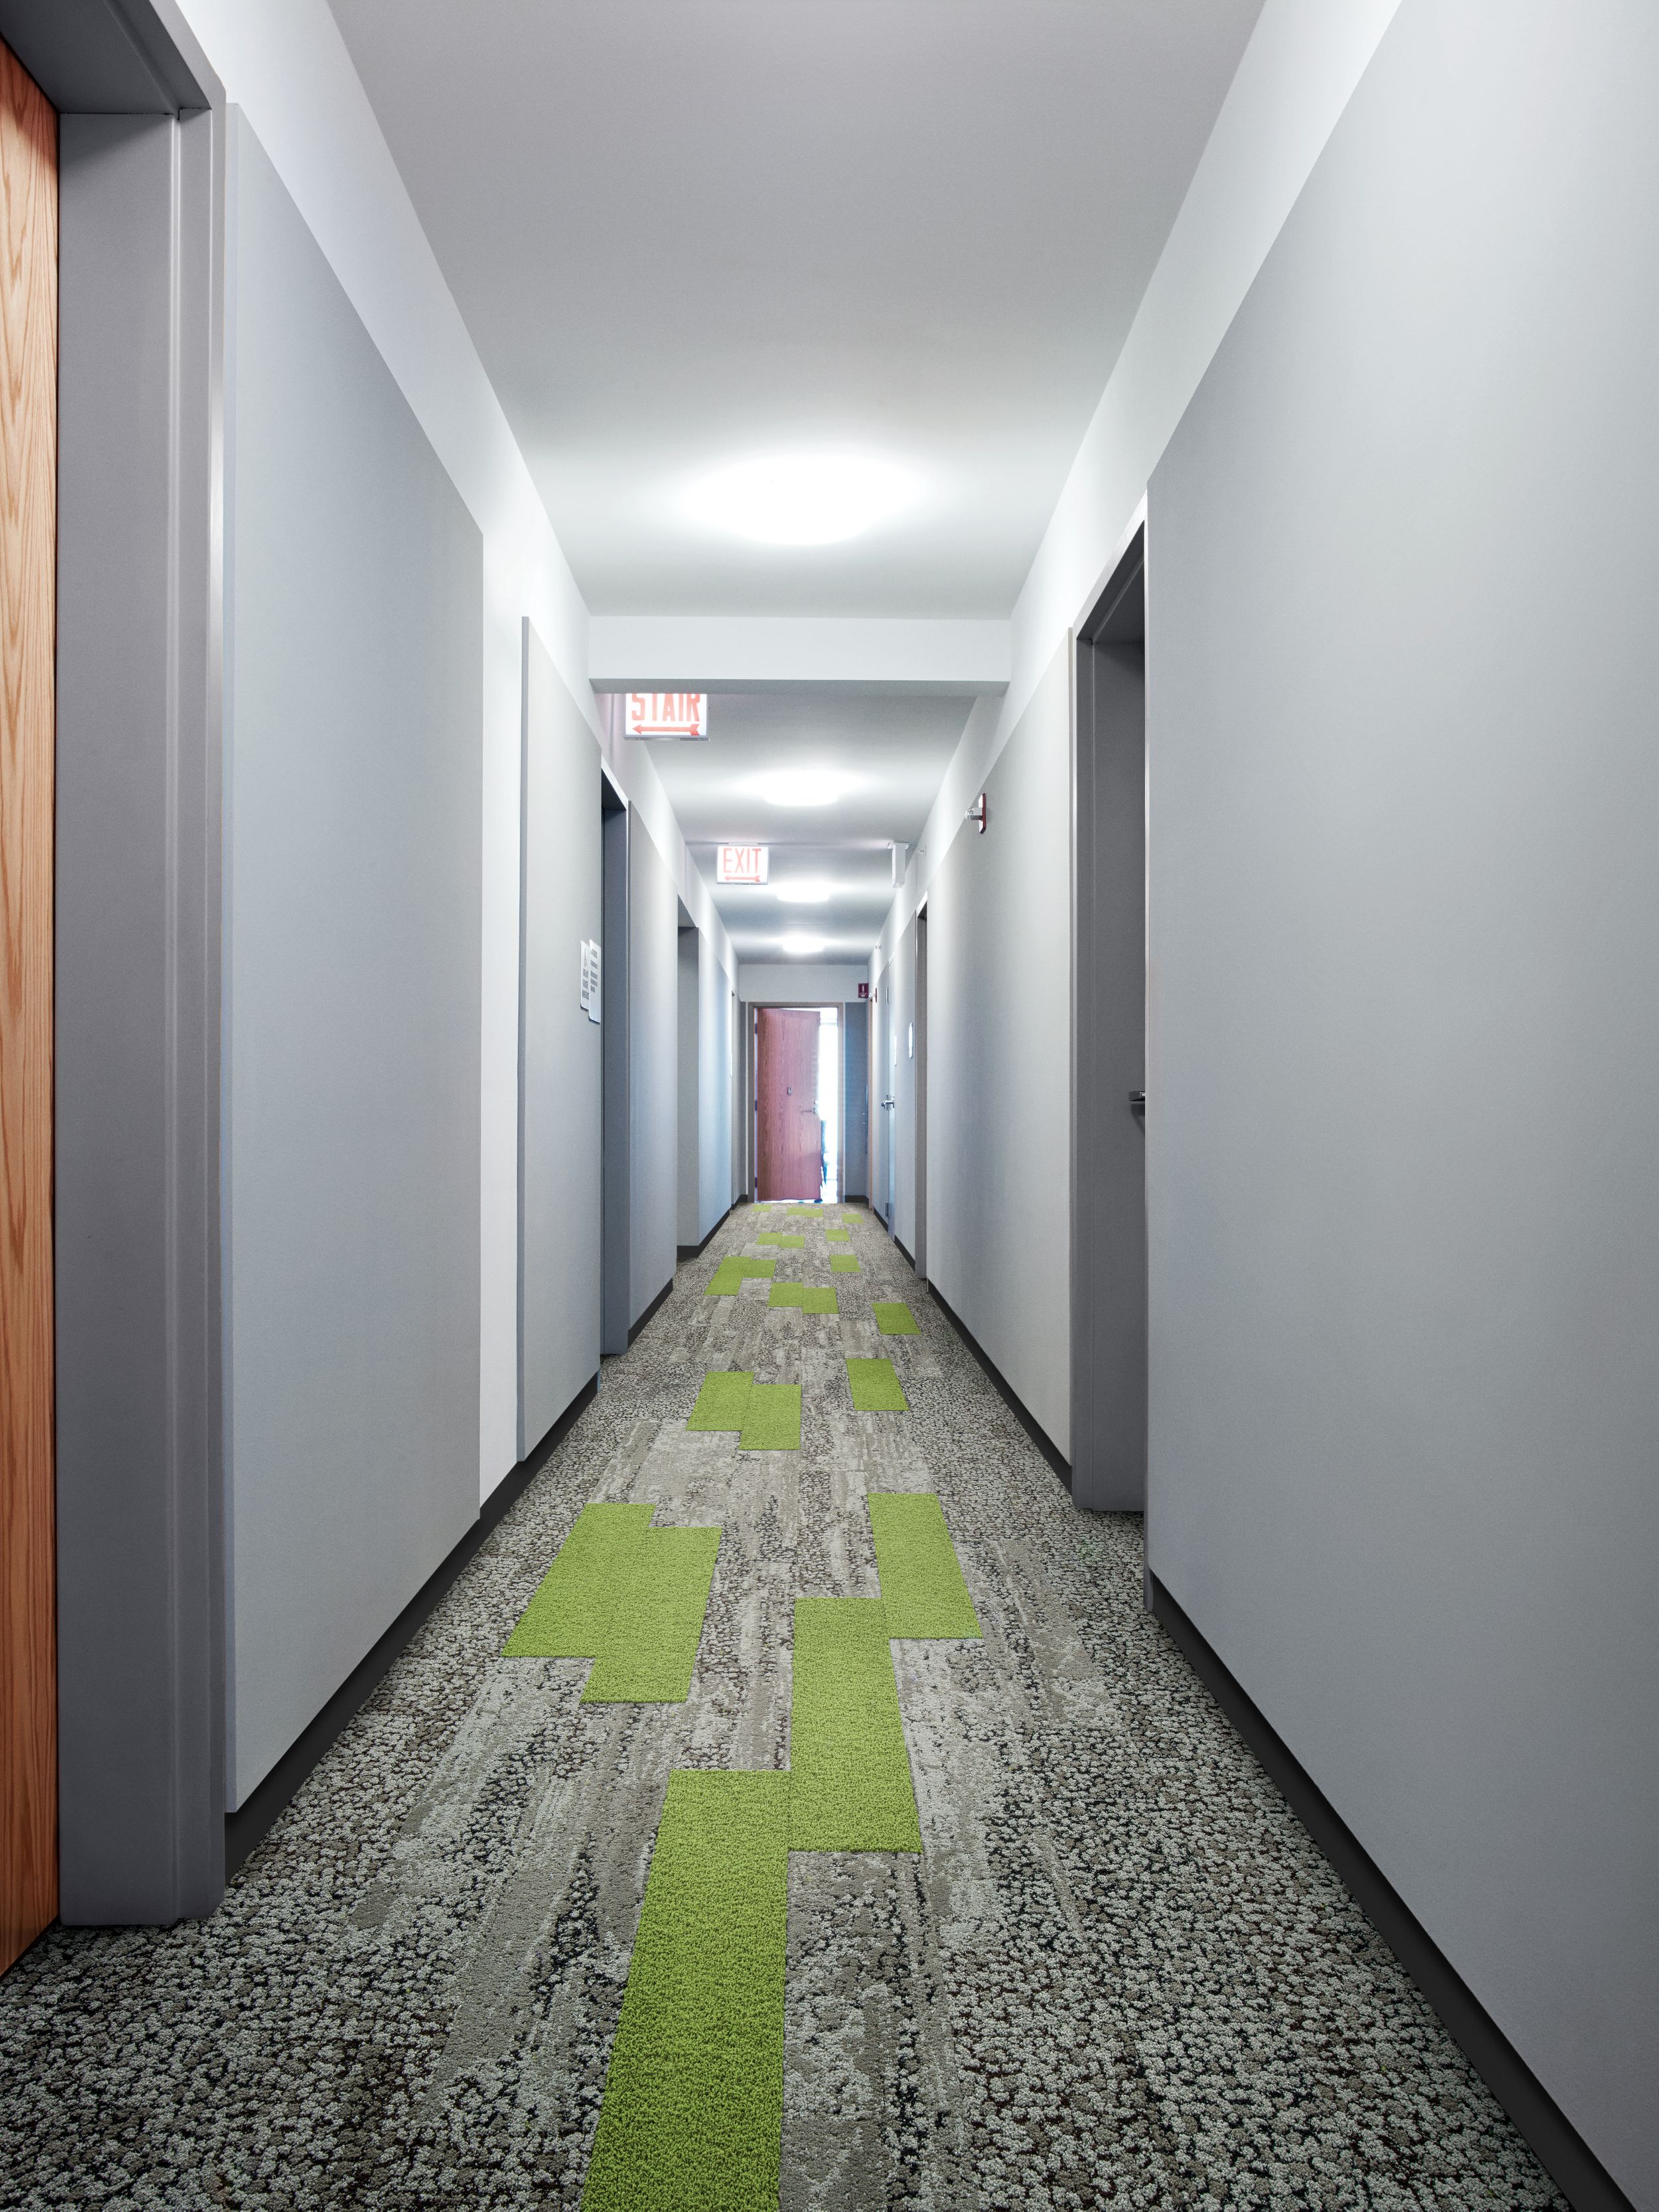 Interface HN830 and HN850 plank carpet tiles in long corridor with mutliple doors and wood door at end image number 3